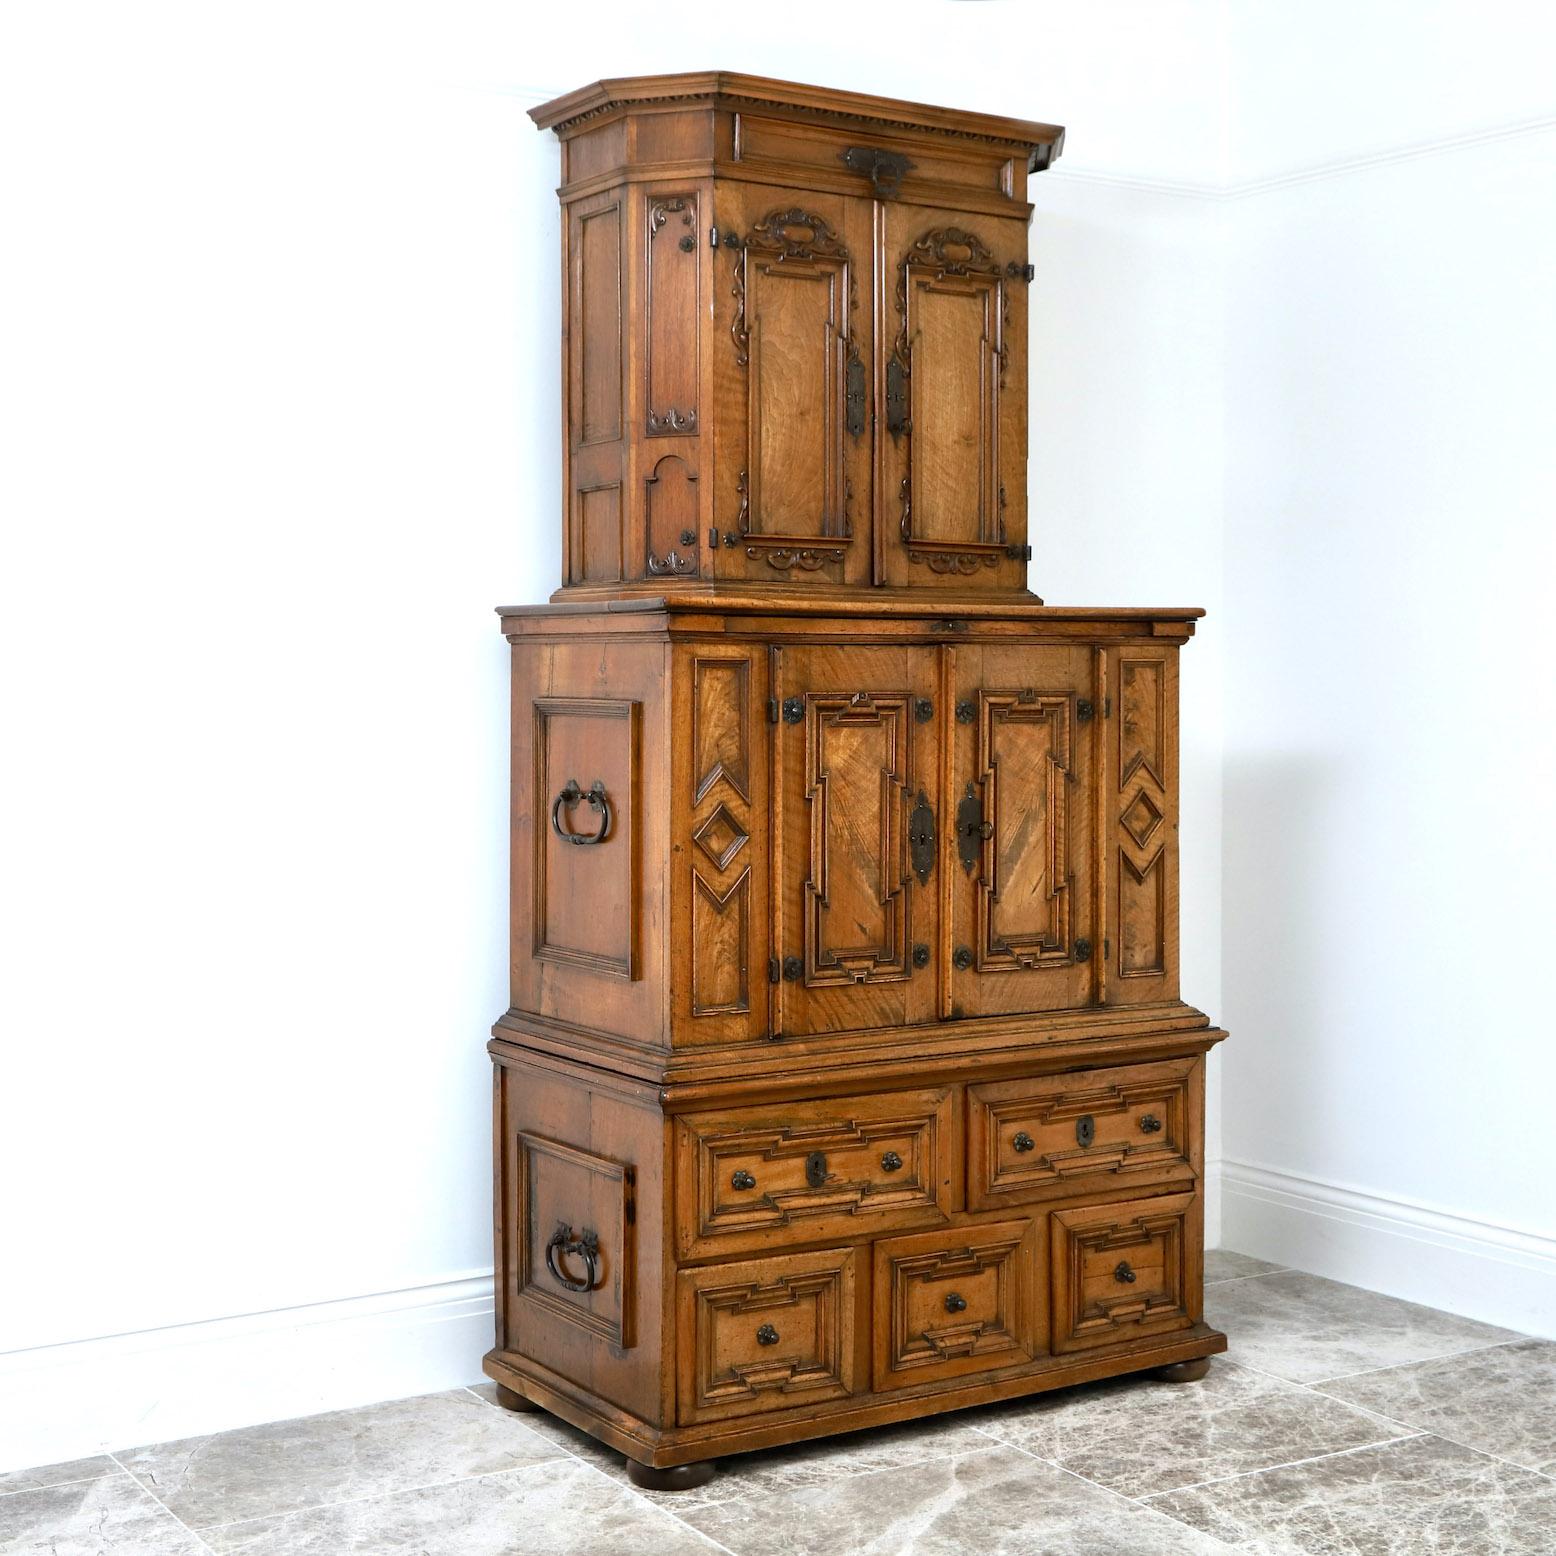 Austrian An 18th Century Baroque Stacking Cabinet For Sale